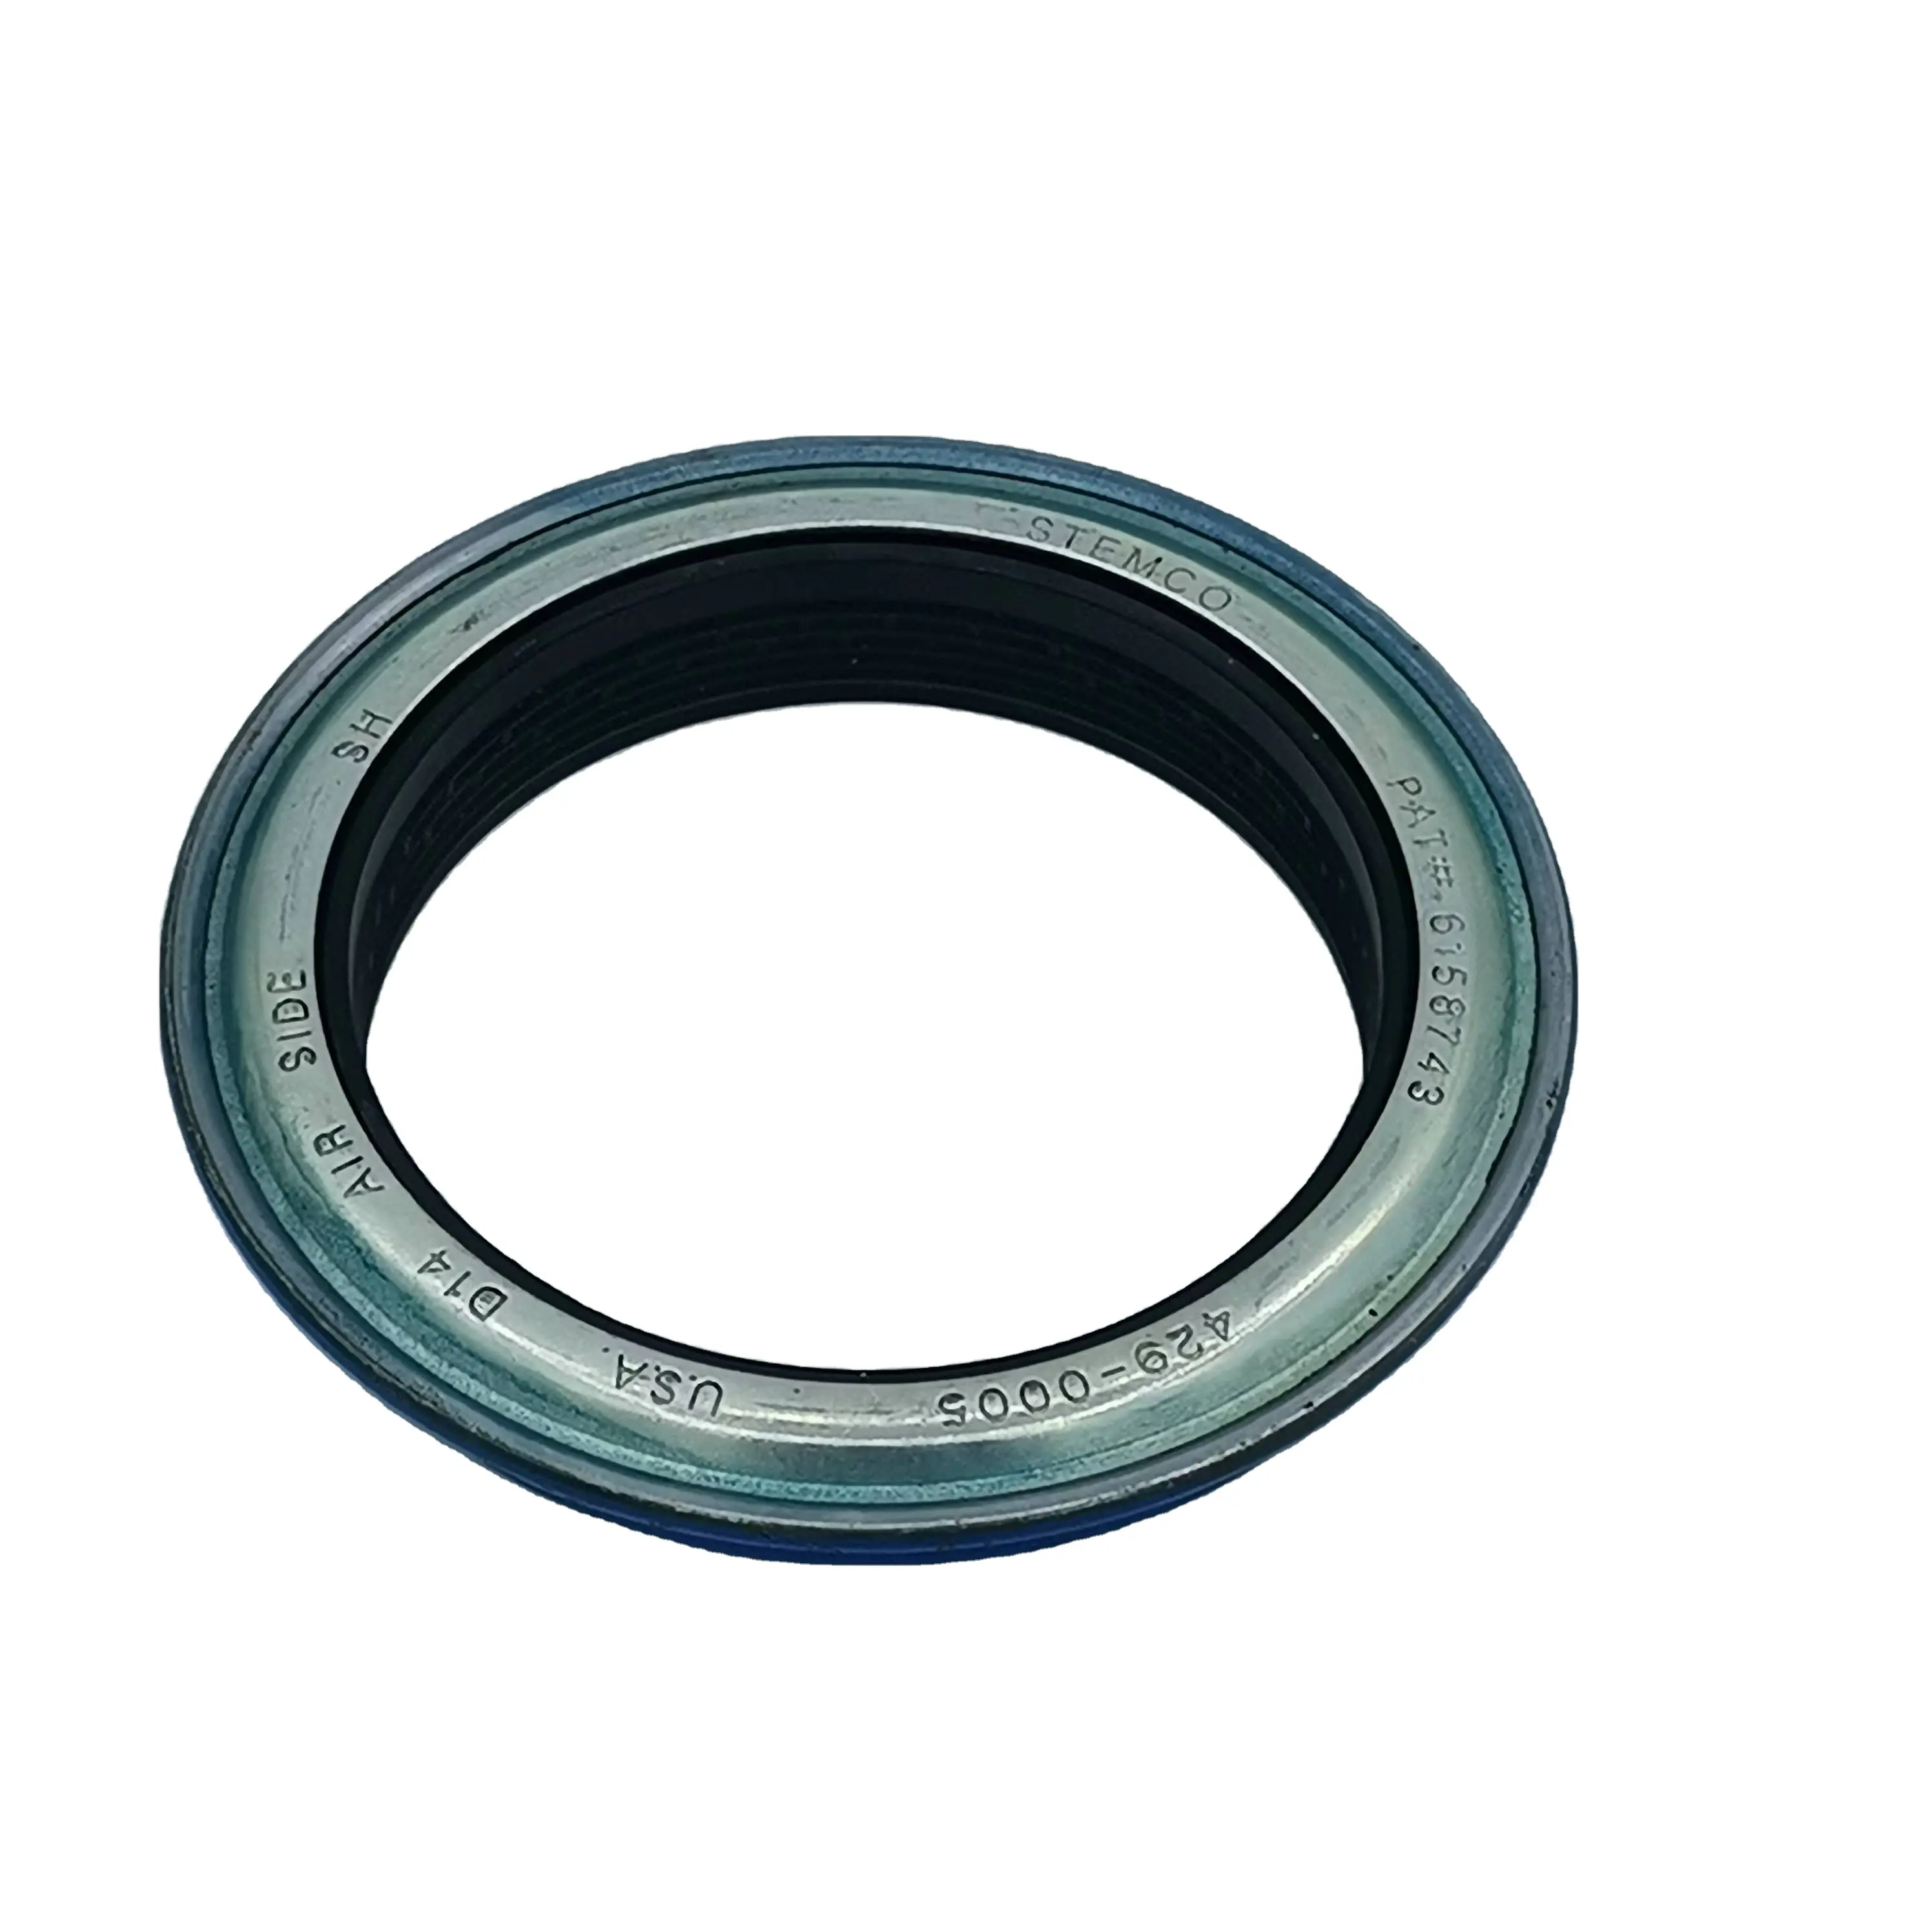 Combined heavy truck differential oil seal 429-0005 supplied by the manufacturer